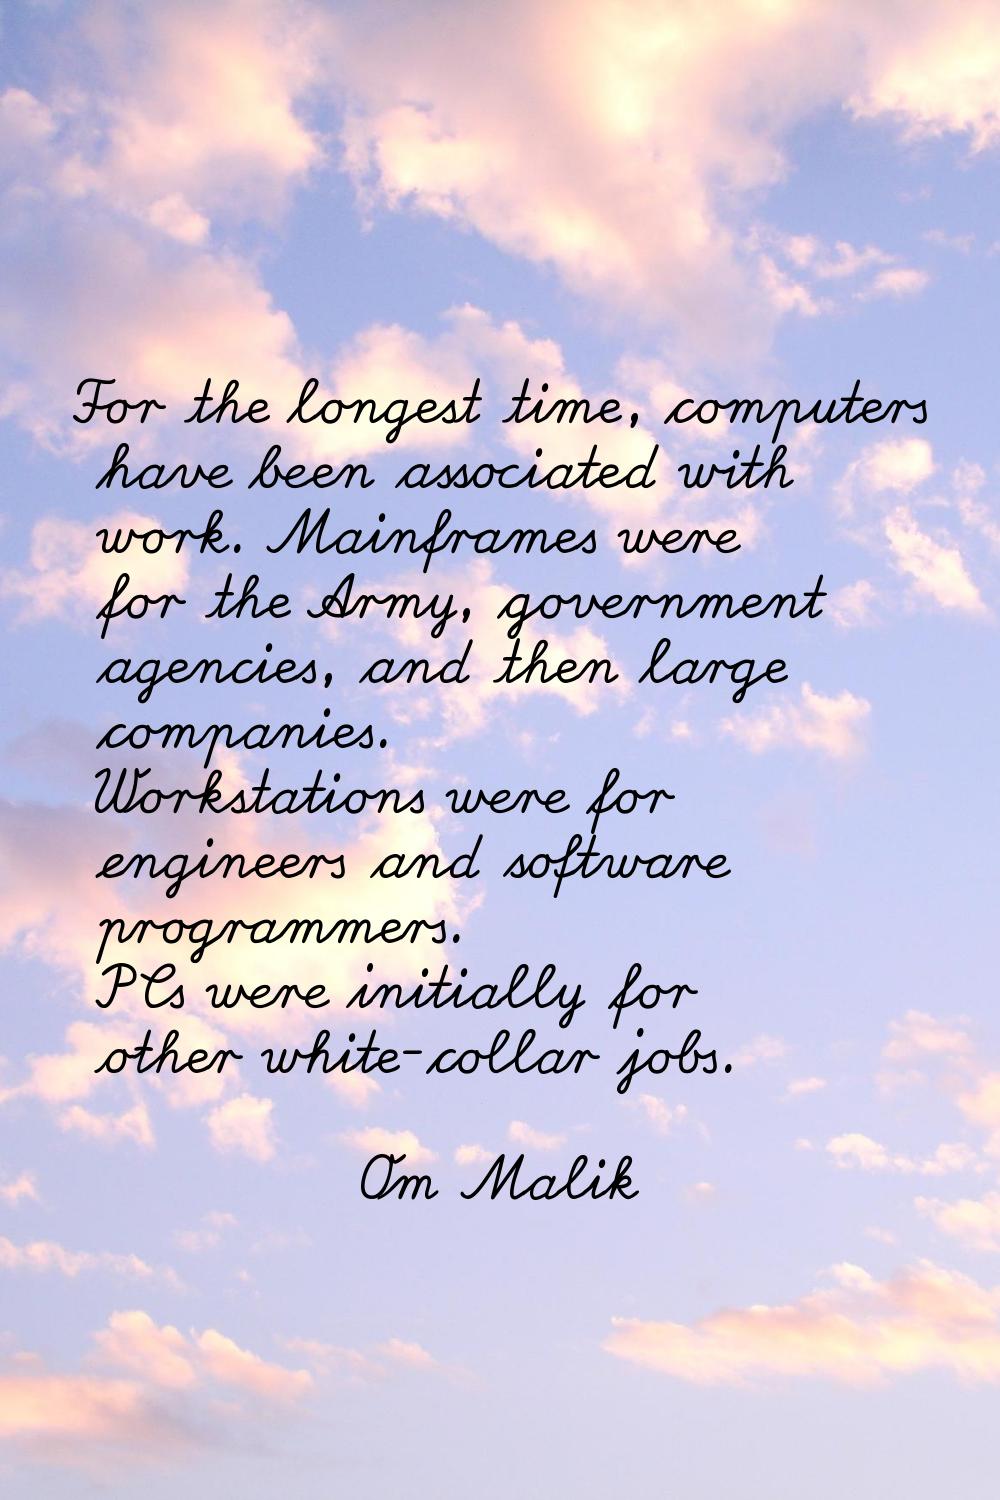 For the longest time, computers have been associated with work. Mainframes were for the Army, gover